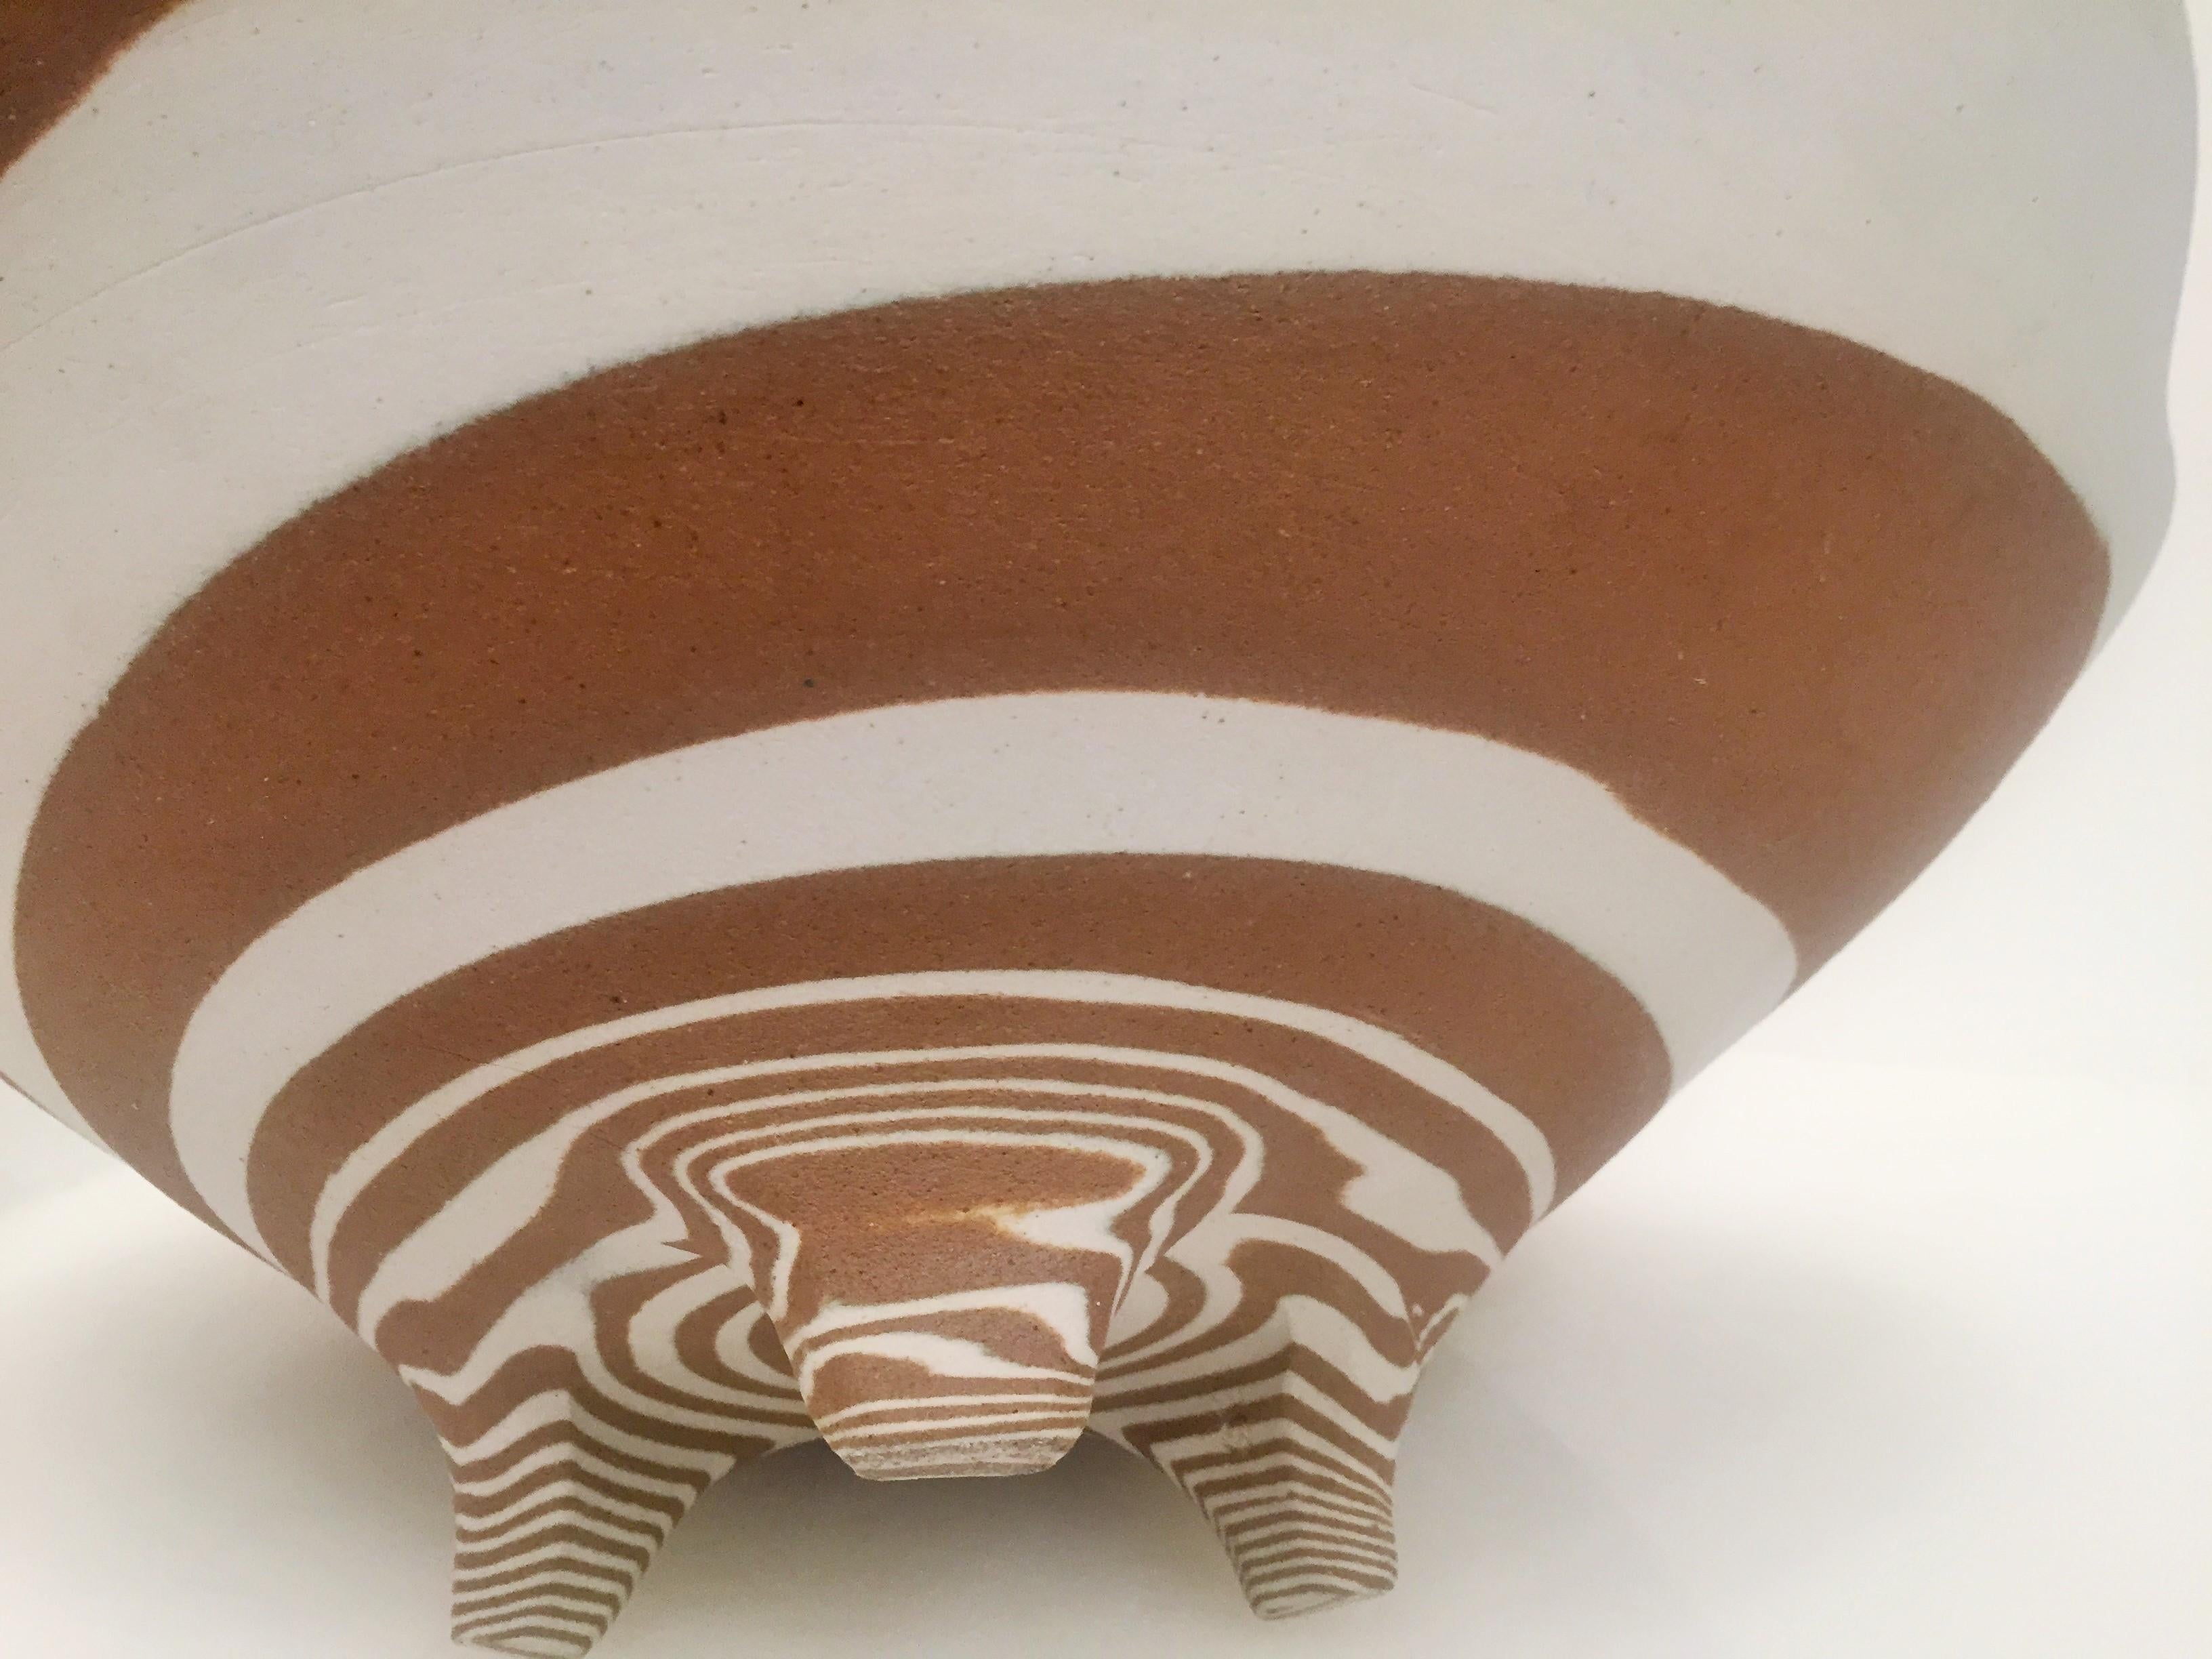 Japanese three-footed ceramic bowl. Made with brown and tan clay, with a beautiful and uneven swirl. The edge of the bowl mimics an abstract rosette. The swirl is even more magnificent when seen from below, which makes the bowl interesting from